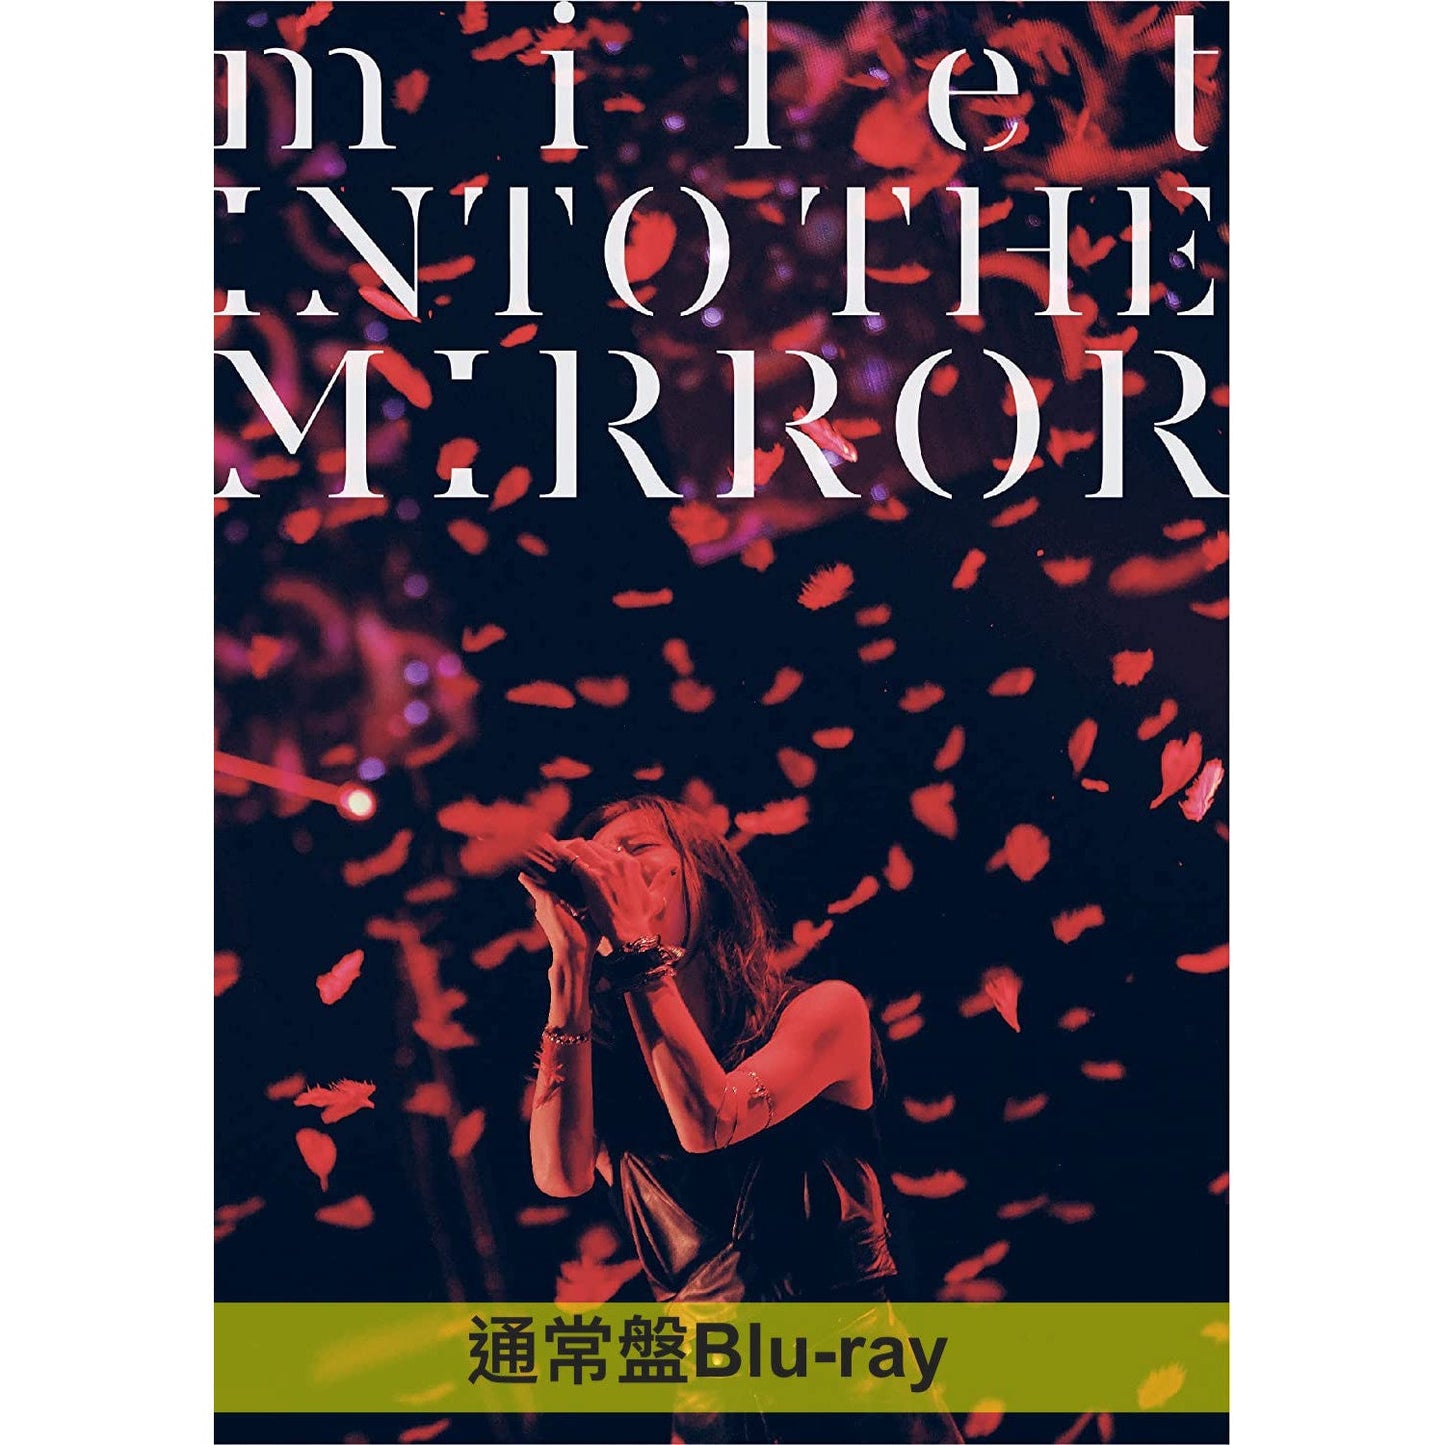 milet 3rd anniversary live “INTO THE MIRROR” Blu-ray